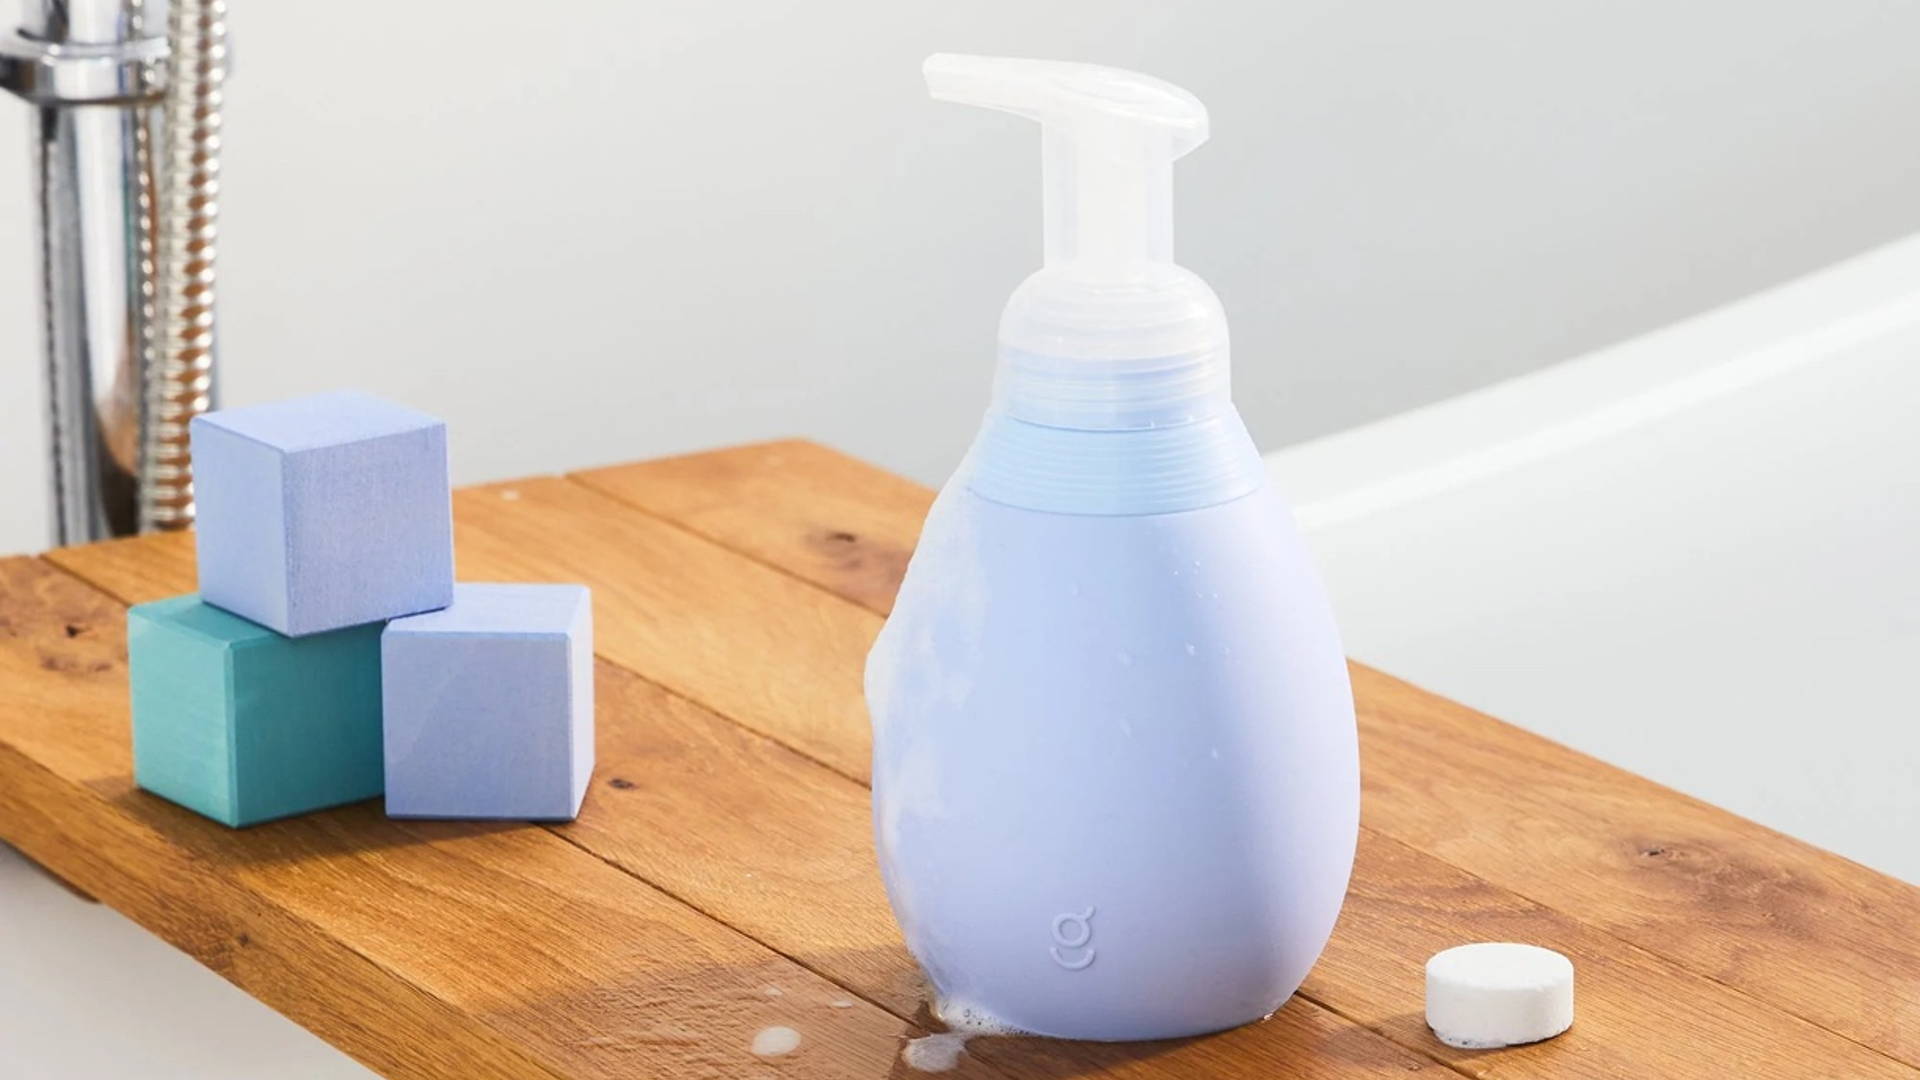 Featured image for Goodnest Reimagines Bath Time Through Infinitely Refillable Packaging